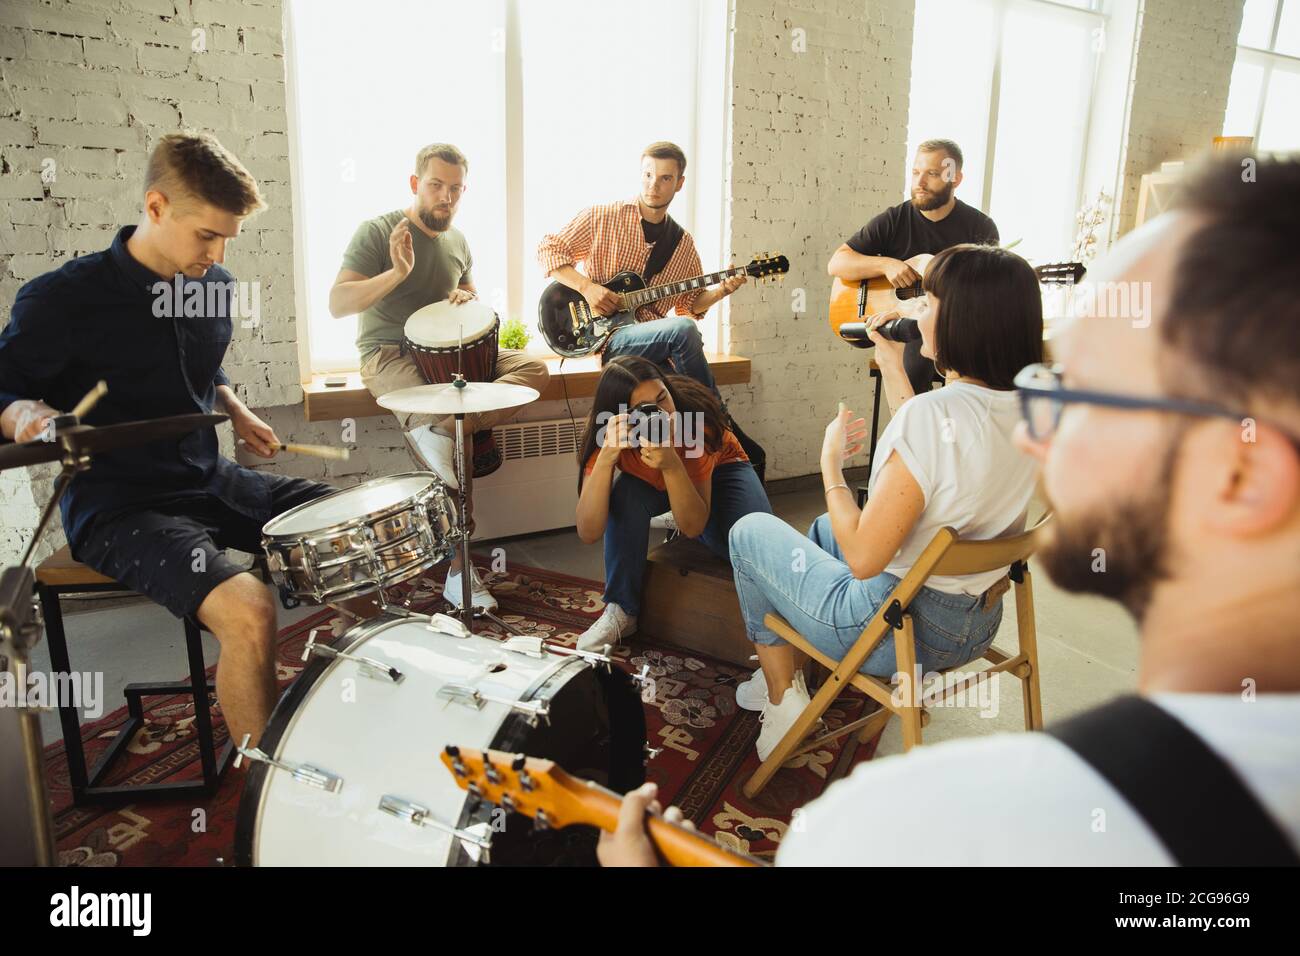 Songs. Musician band jamming together in art workplace with instruments. Caucasian men and women, musicians, playing and singing together. Concept of music, hobby, emotions, art occupation. Stock Photo